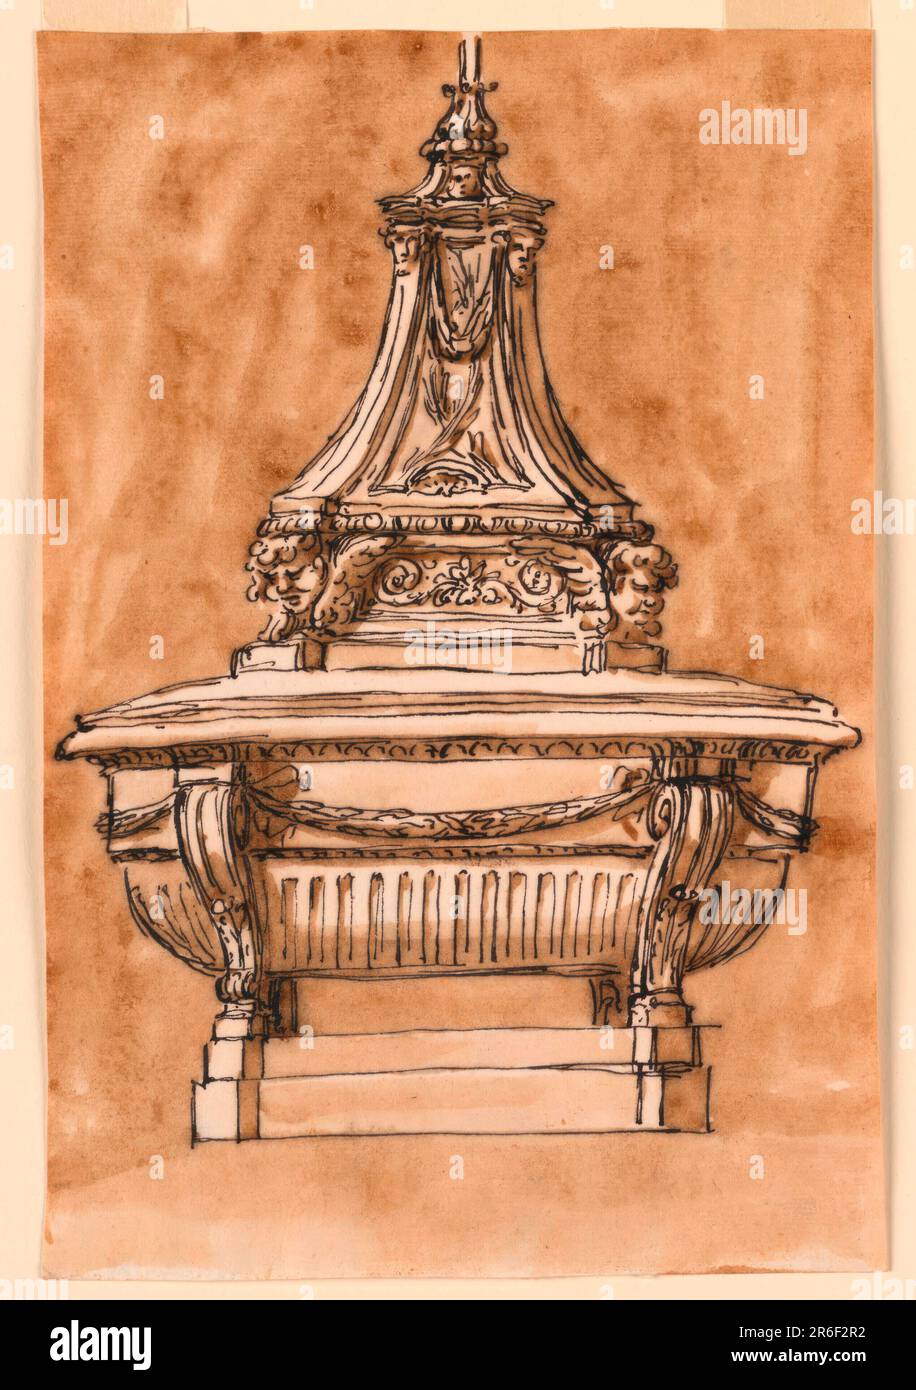 The bowl is supported at the ends by four revered consoles upon two octangonal plinths. The lower part of the bowl is fluted, the upper one has a frieze with festoons, hanging from the upper spirals of the consoles. Below, the lif in plain. Upon an octagonal base with cherubim at the oblique sides, raises a pedestal supporting a socket from which a cross springs. Only part of it is visible. Usual background. Date: ca. 1775. Pen and brown ink, brush and brown wash on lined off-white laid paper. Museum: Cooper Hewitt, Smithsonian Design Museum. Stock Photo